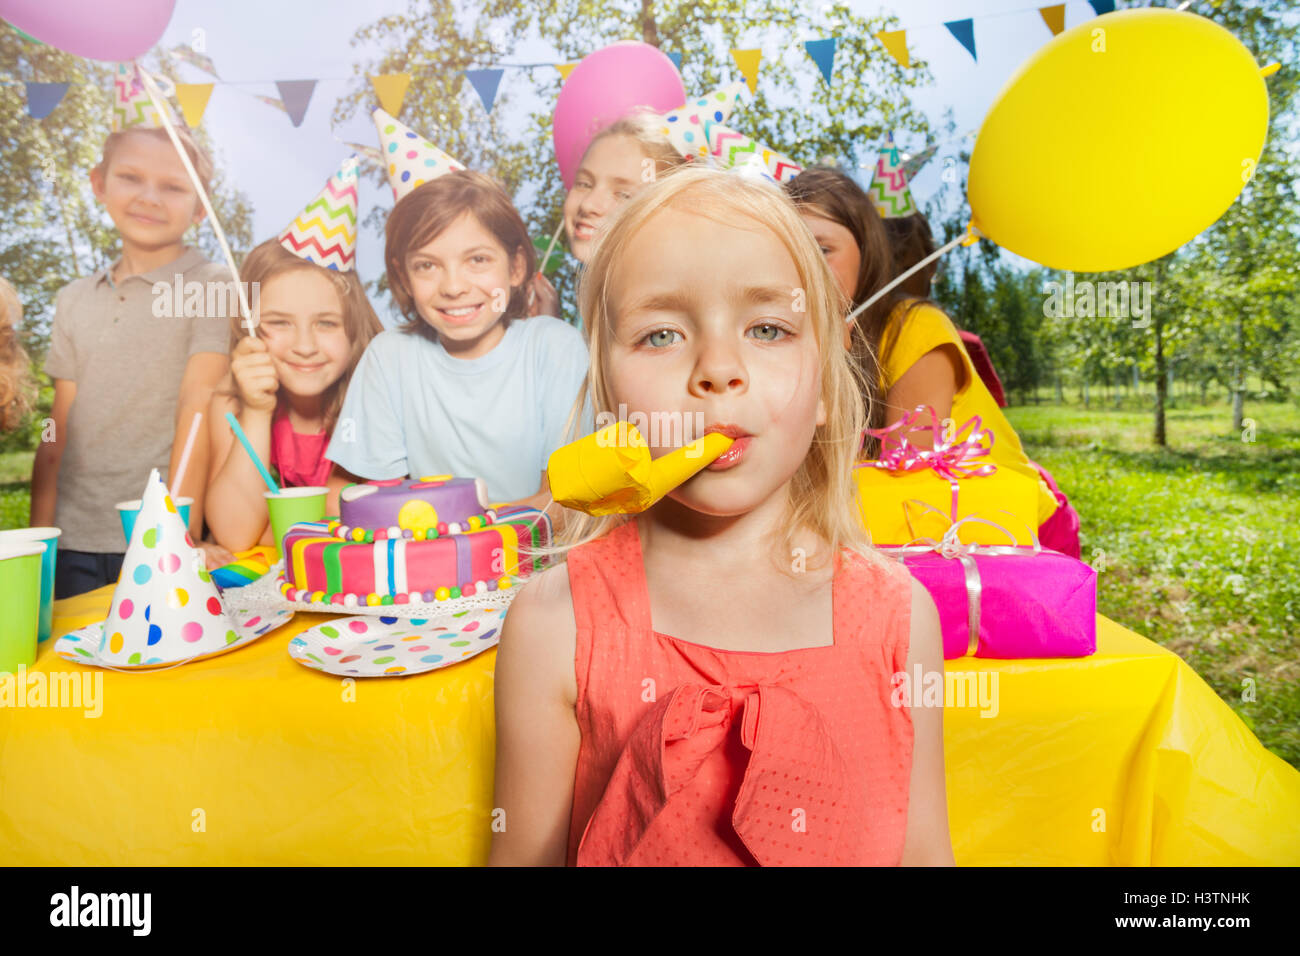 Little adorable girl playing with party blower Stock Photo